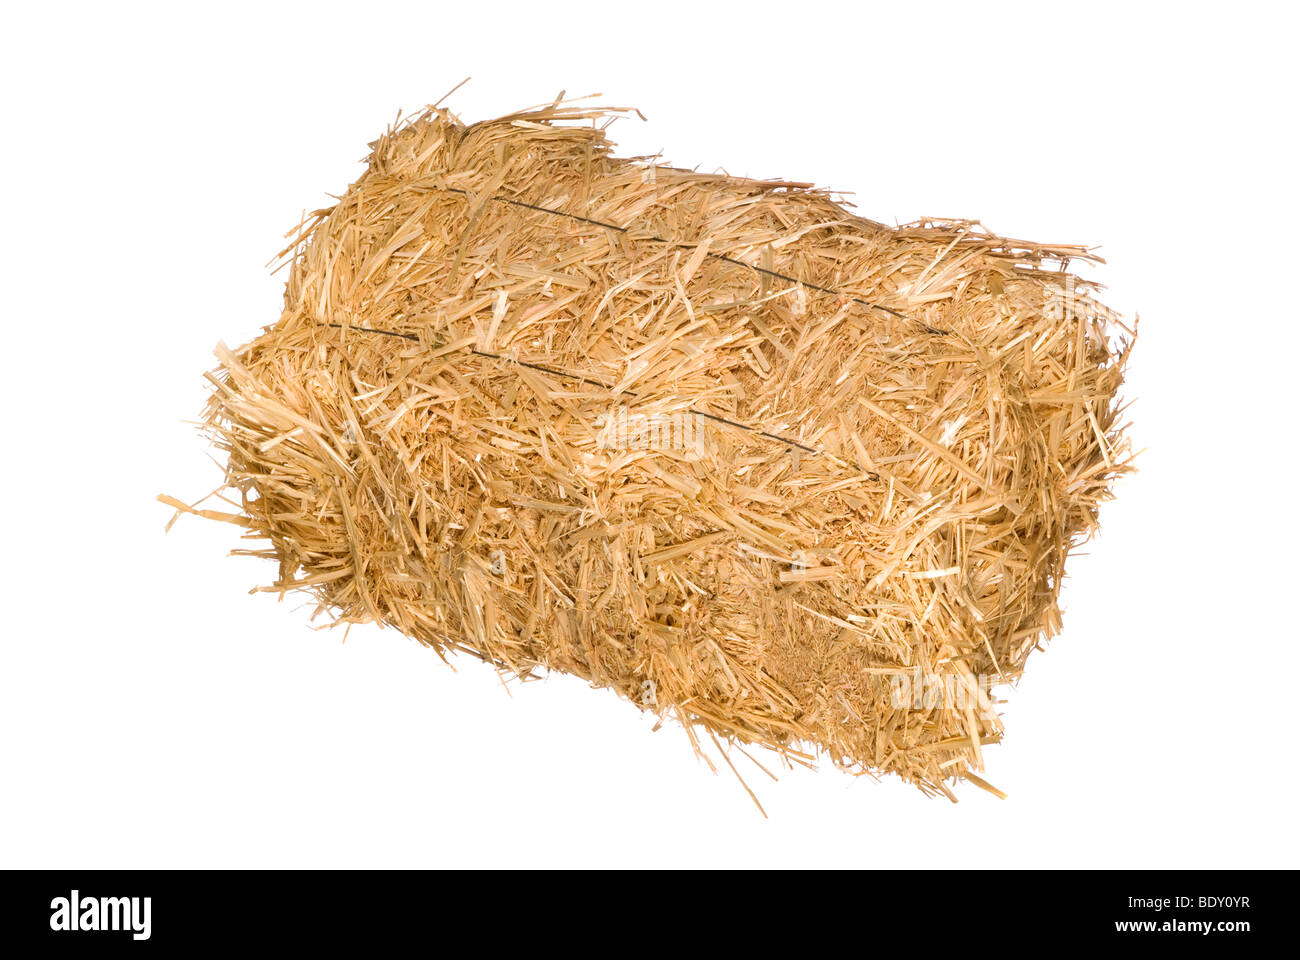 A bale of hay isolated on a white background Stock Photo